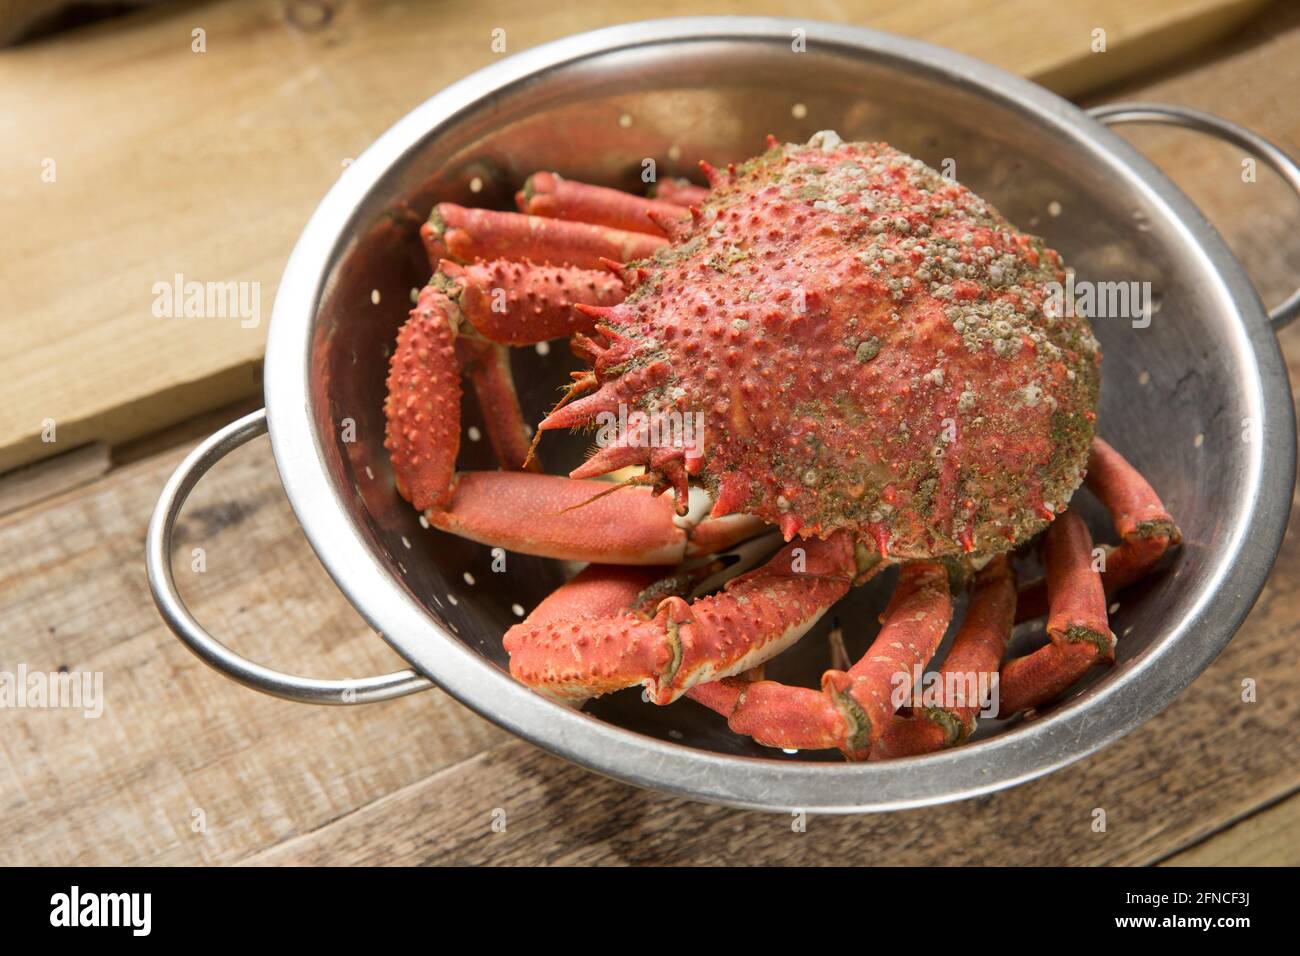 A boiled, cooked spider crab, Maja brachydactyla, that has been left to cool after cooking, Spider crabs are common in parts of the UK and are being s Stock Photo